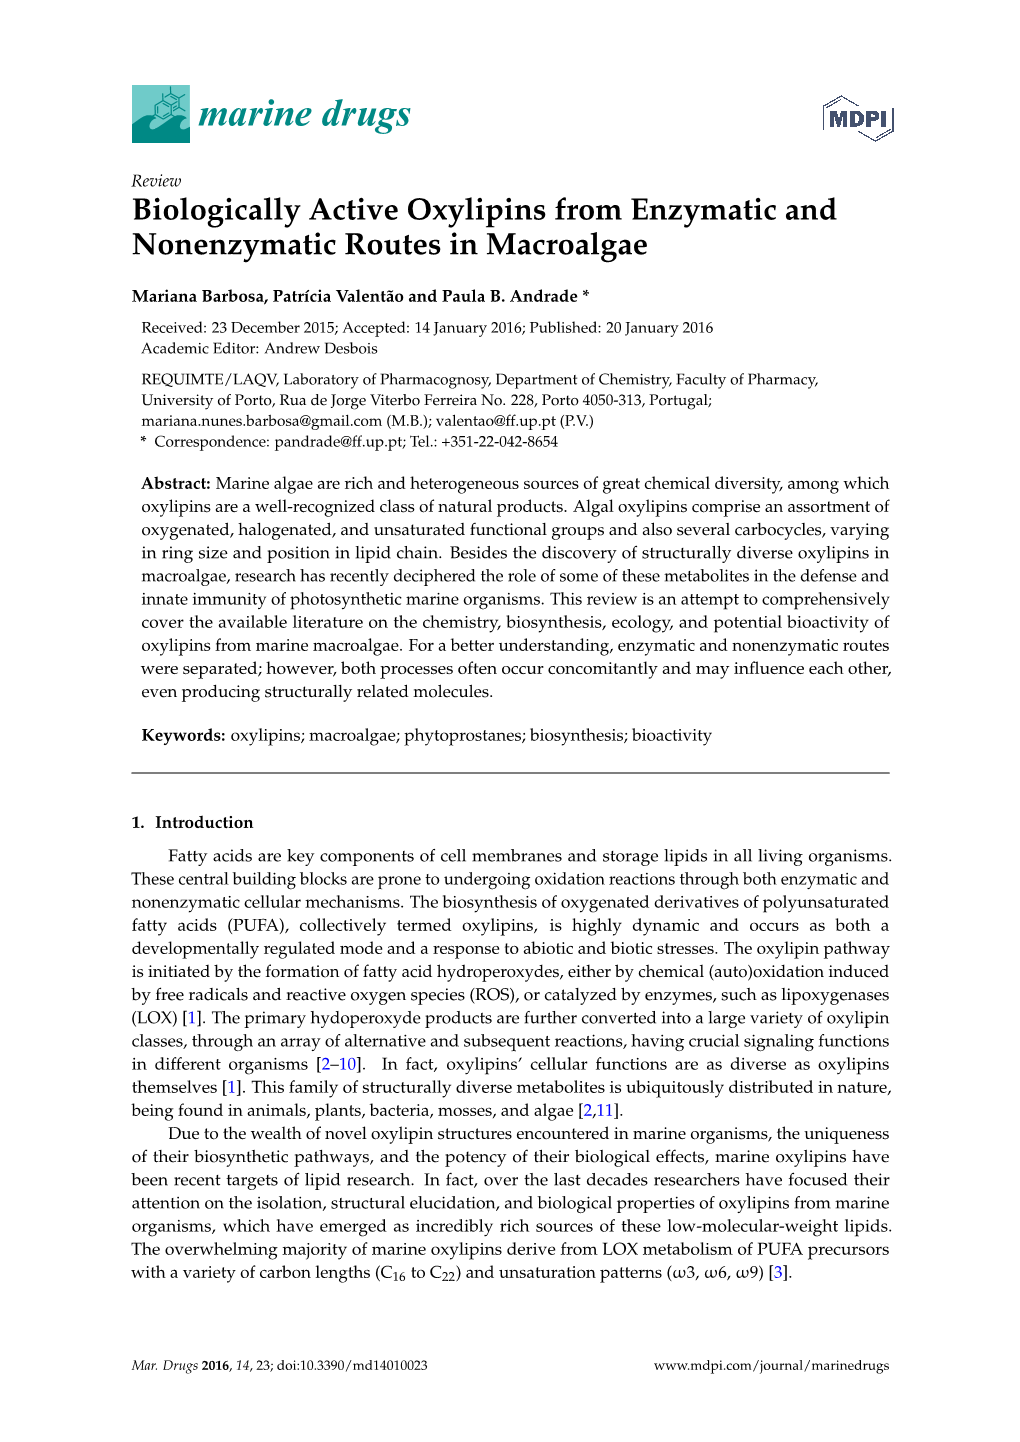 Biologically Active Oxylipins from Enzymatic and Nonenzymatic Routes in Macroalgae